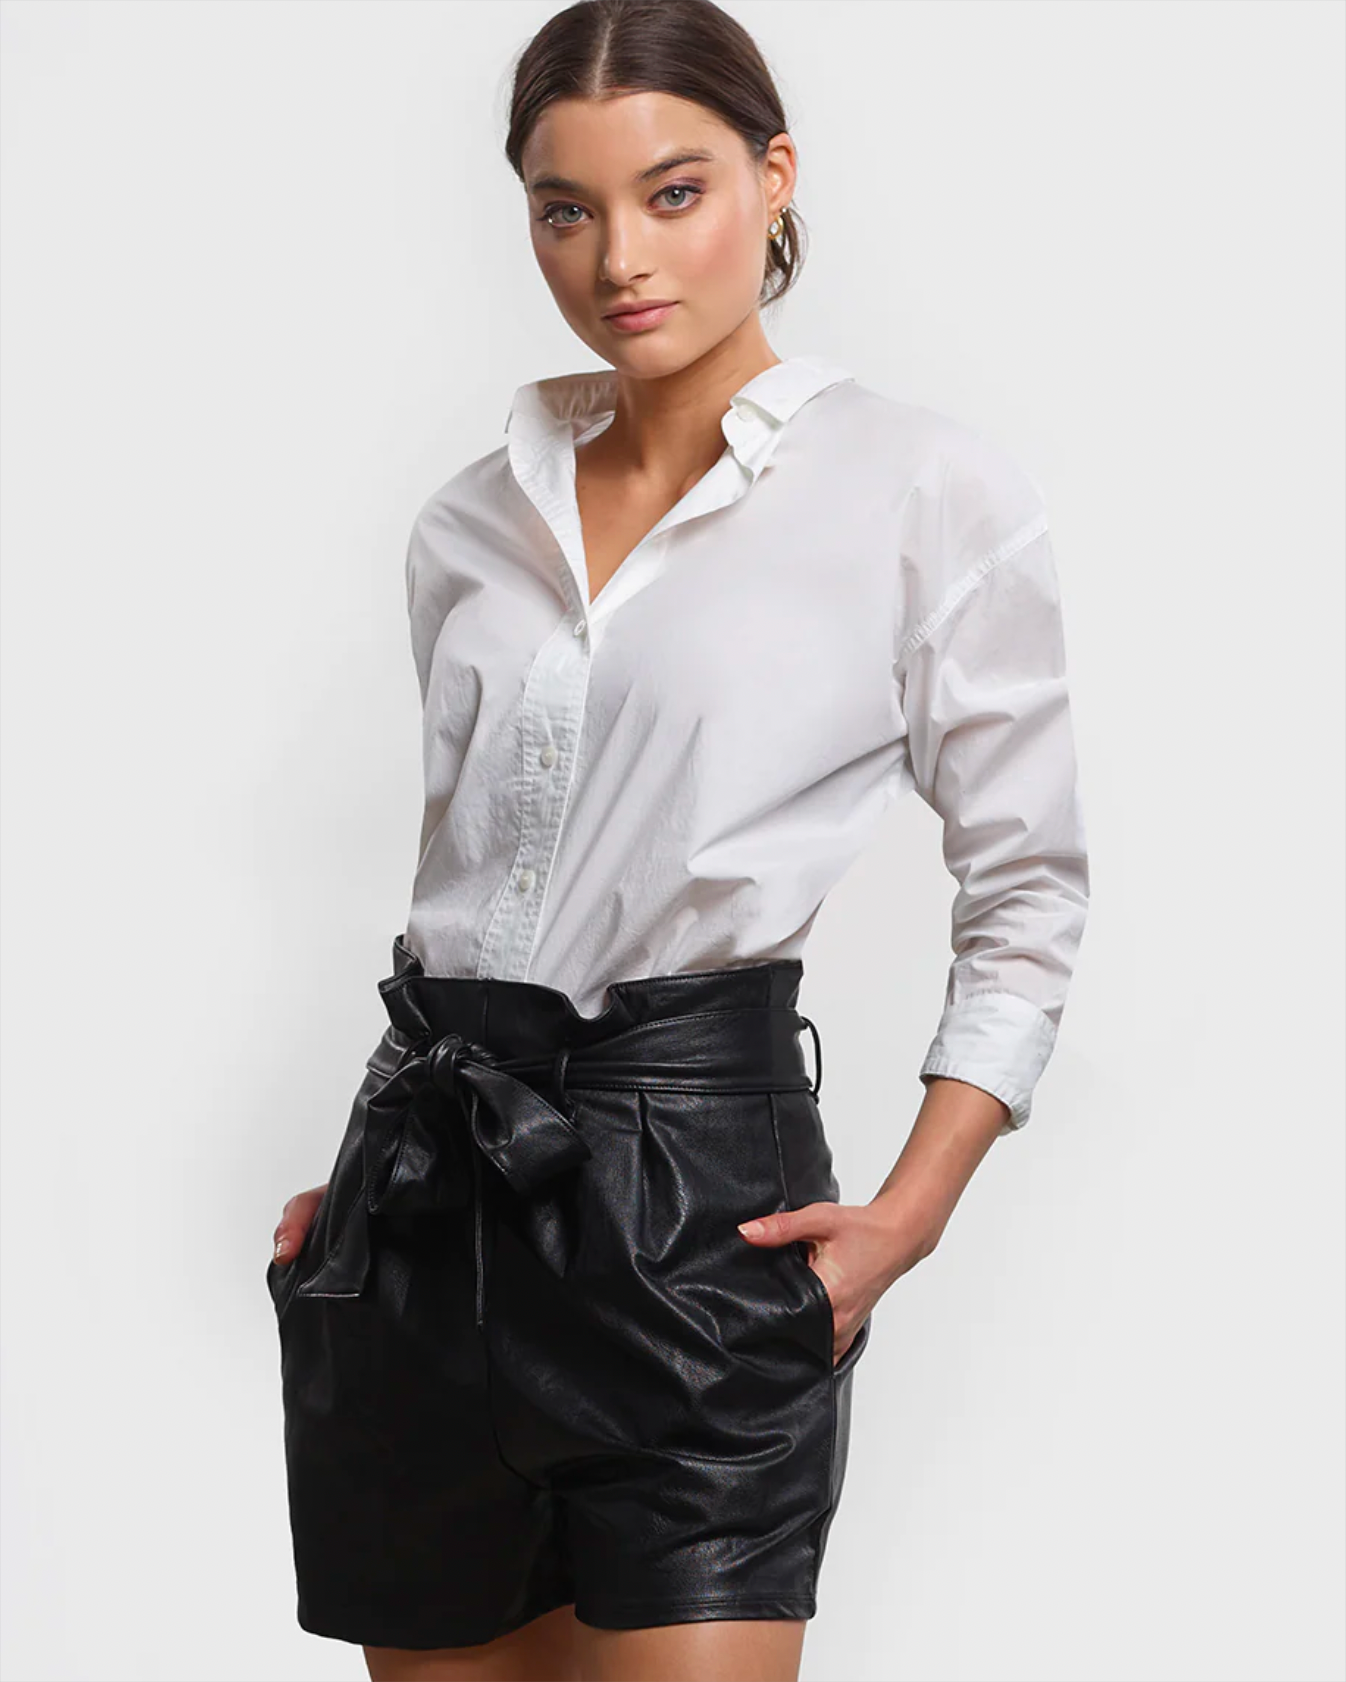 Model wearing Commando Faux Leather Paperbag Shorts in black wearing white shirt on a white background